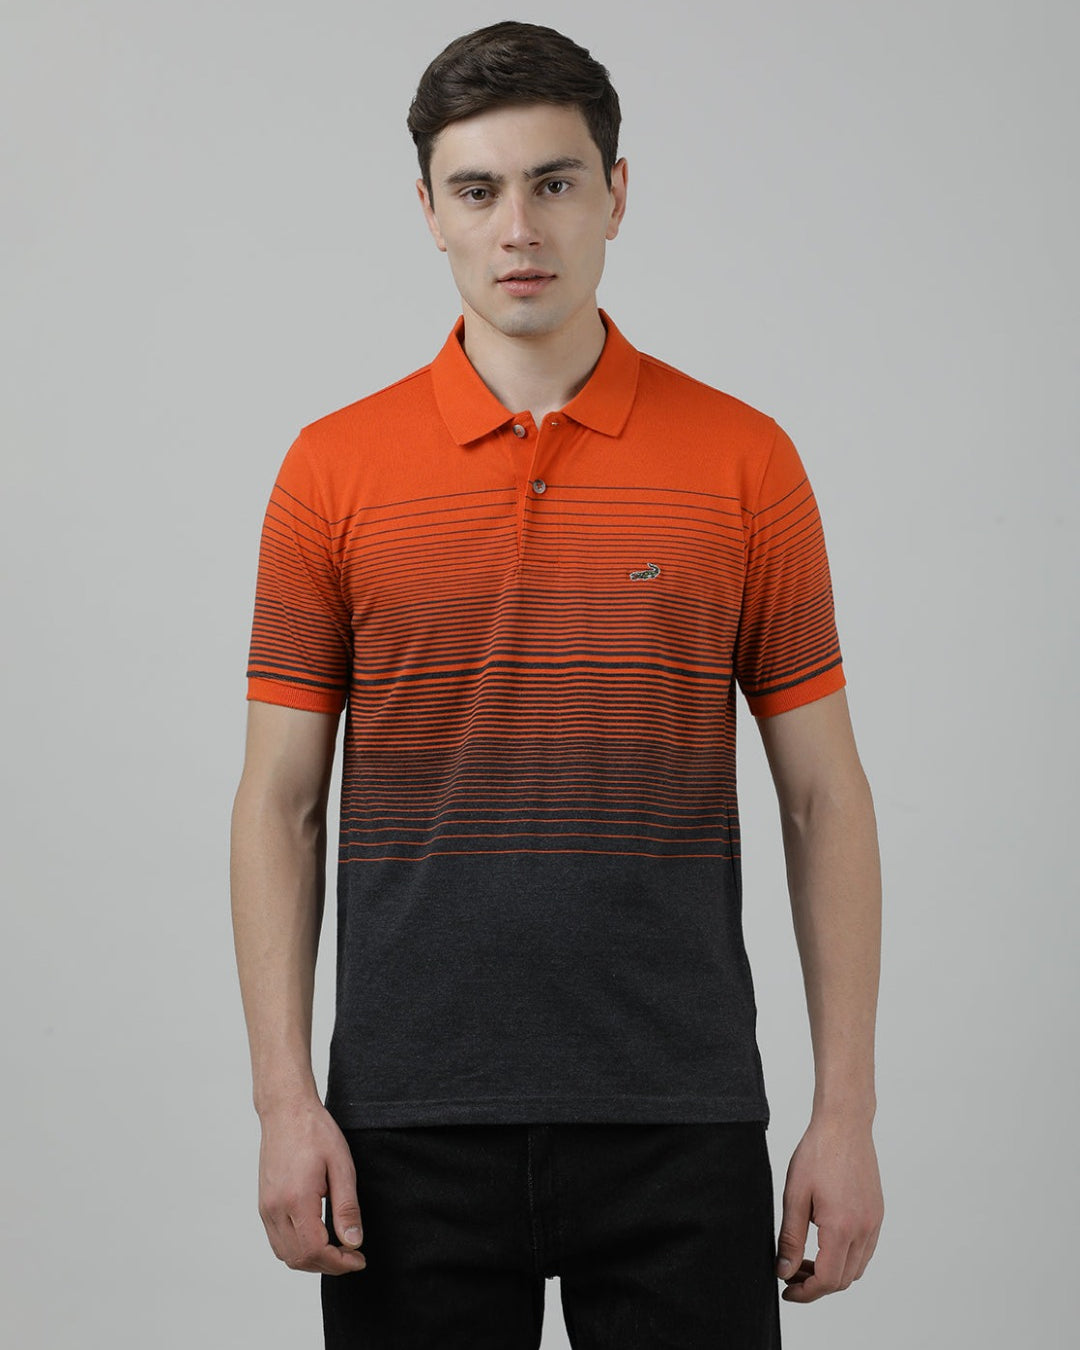 Casual Orange T-Shirt Half Sleeve Slim Fit Jersey Engineering Stripe with Collar for Men